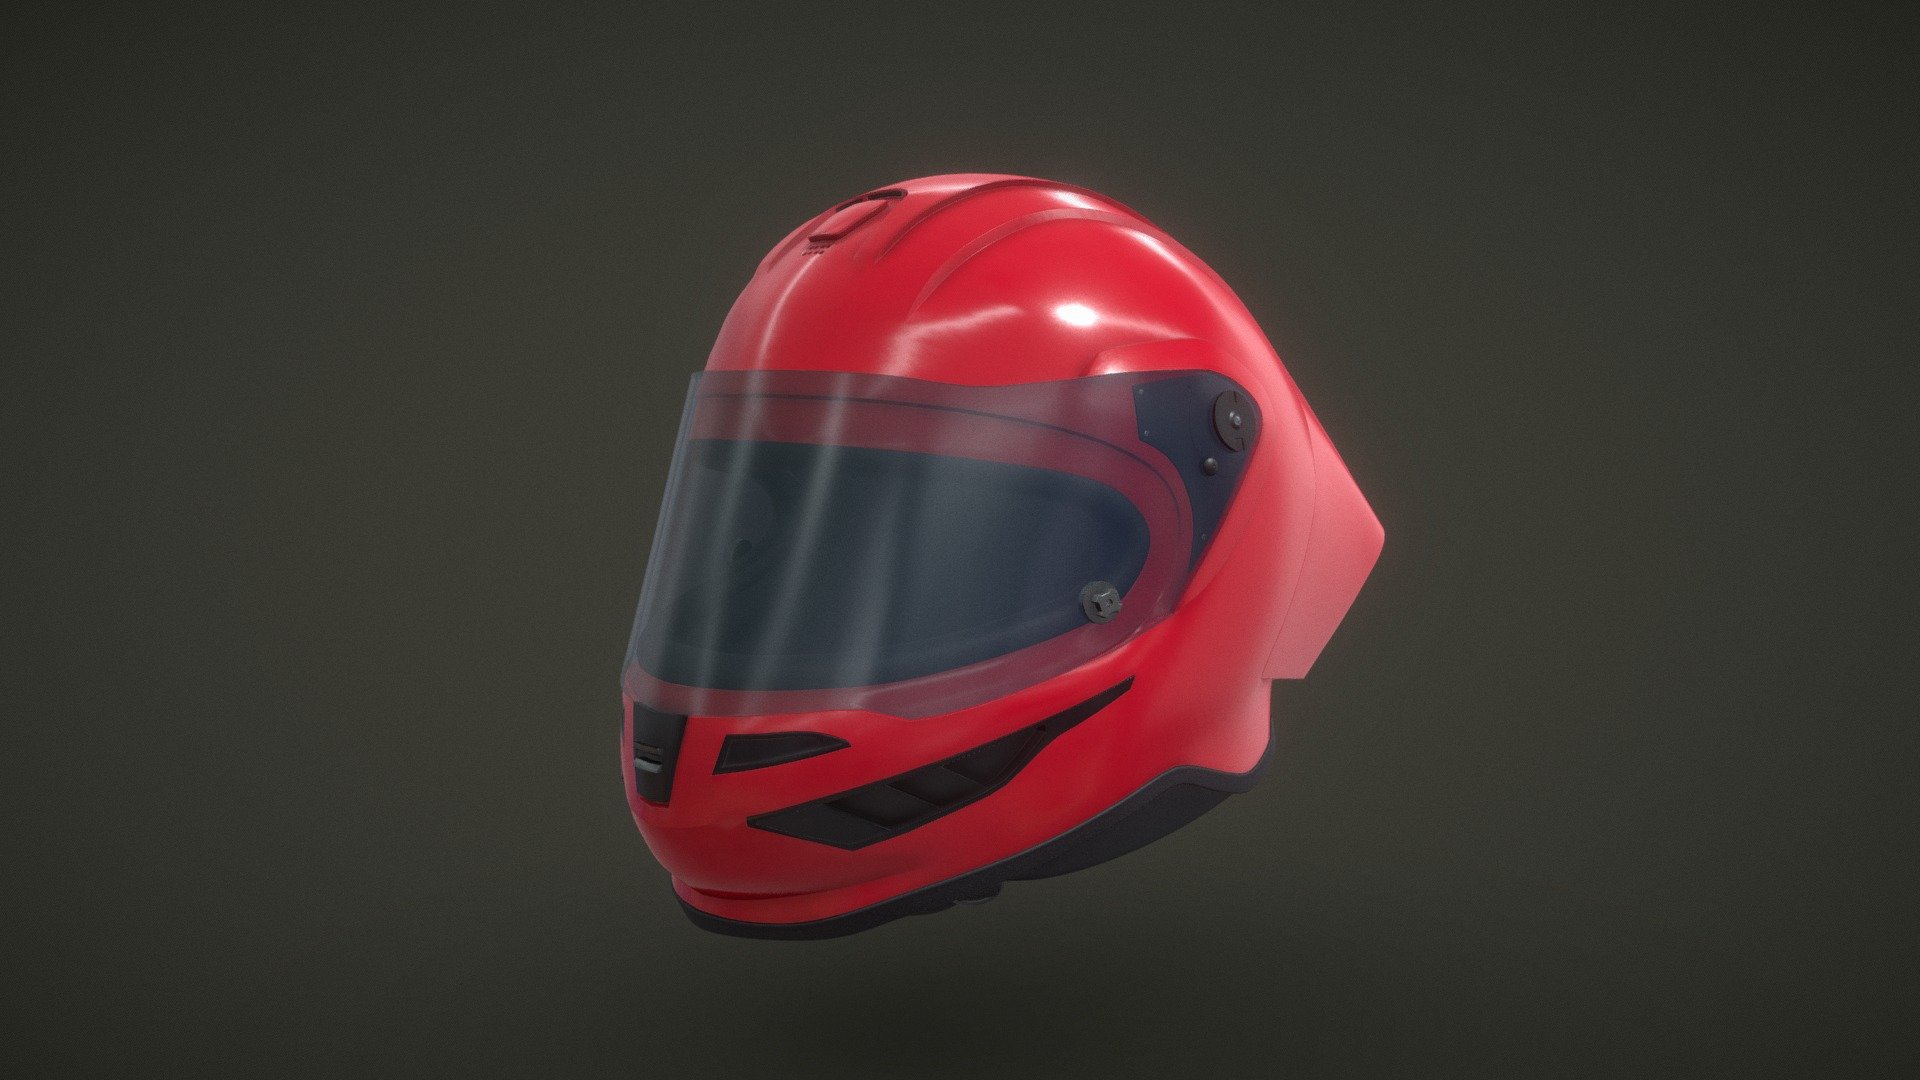 If you decide to puchase this model I’ve included a PSD of the helmet’s UVs for creating custom designs. As well as an OBJ file for use in other software like Procreate 3d model